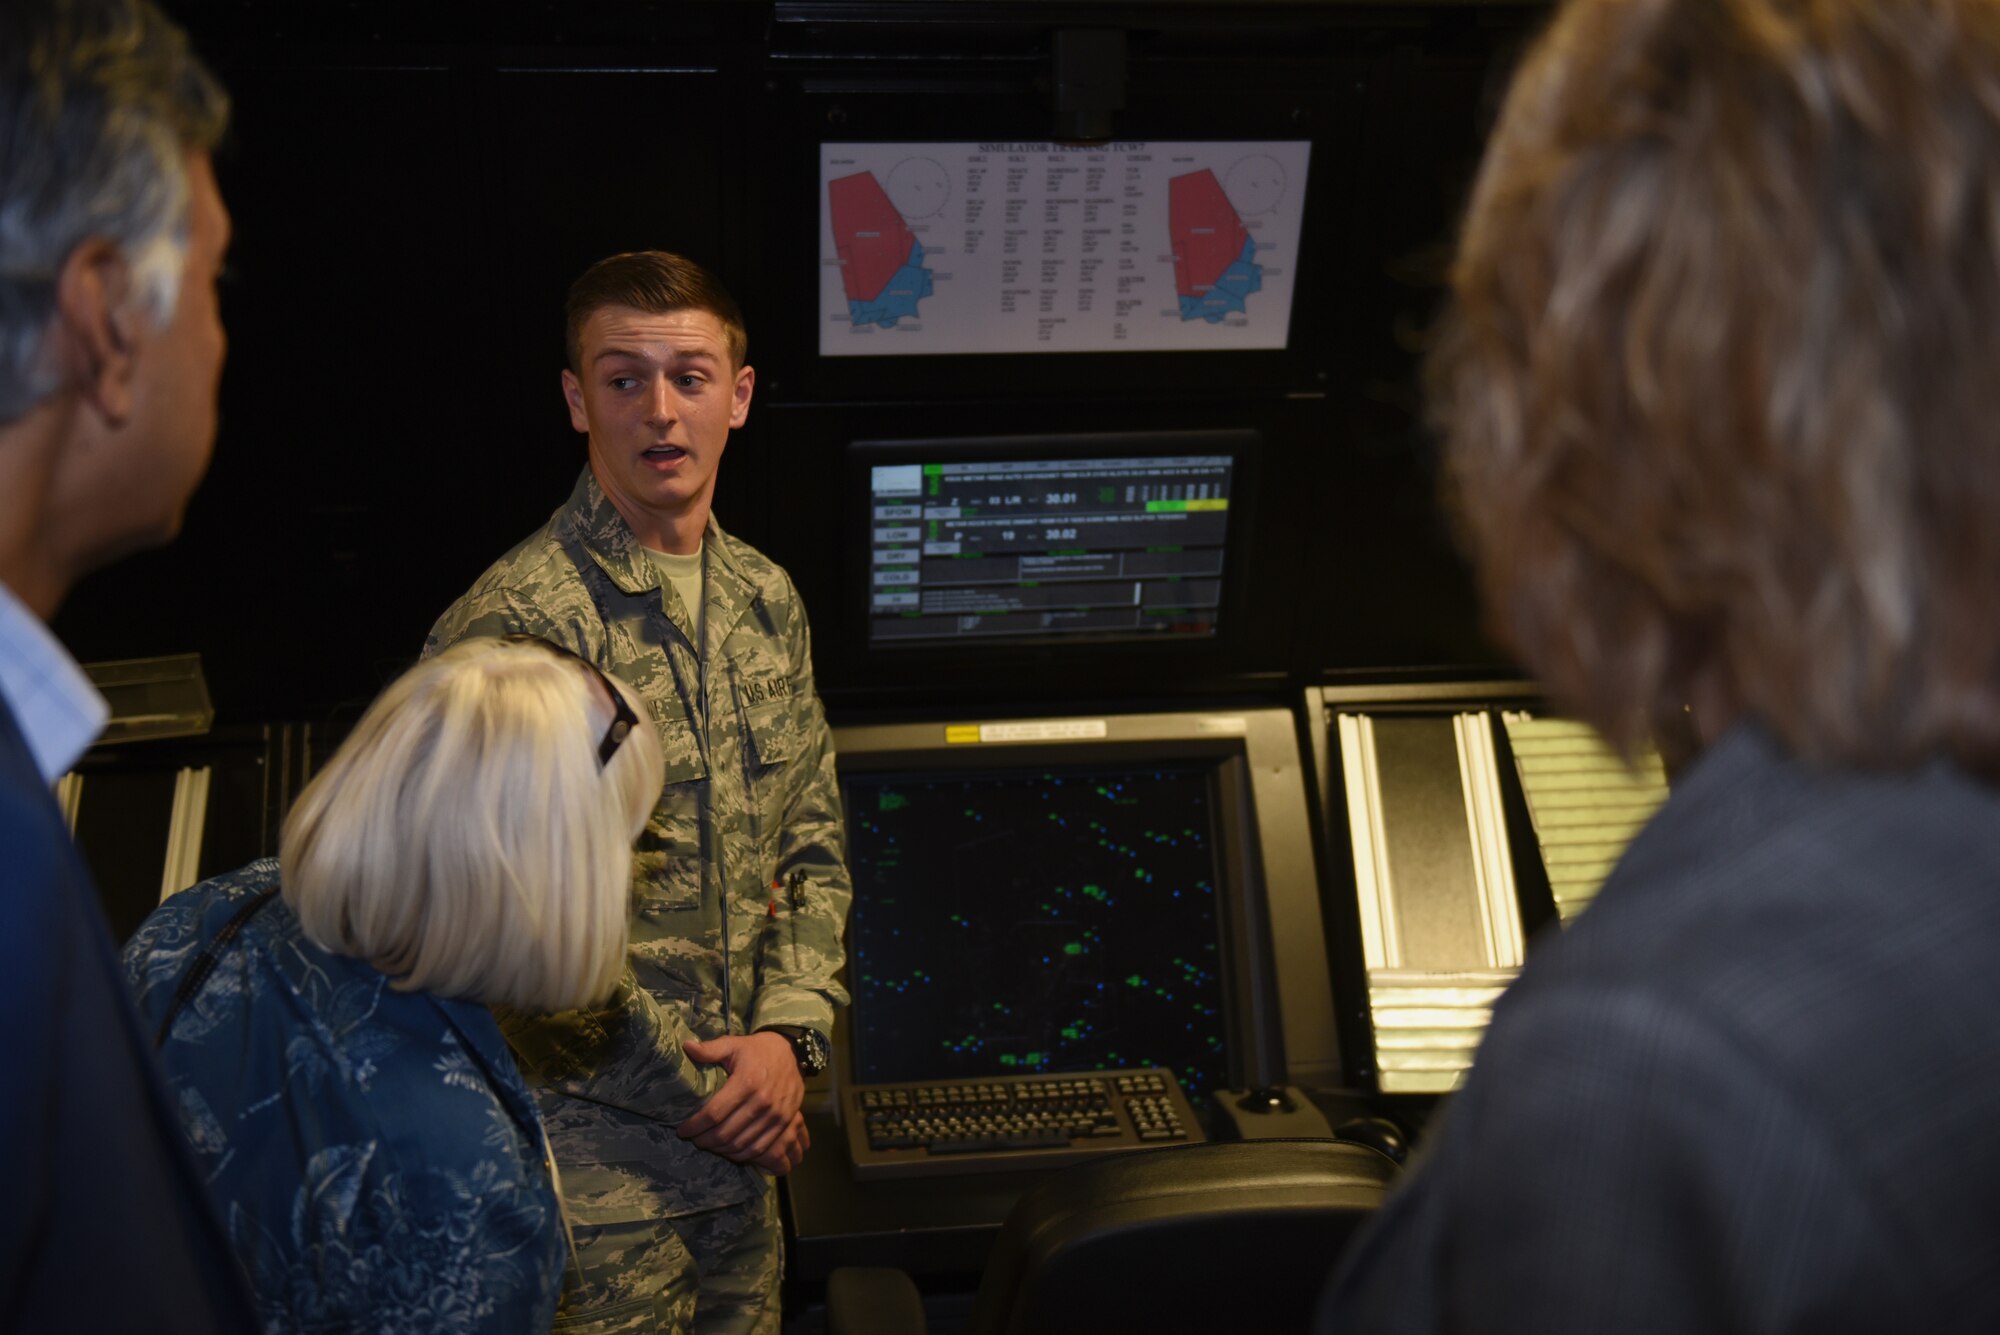 U.S. Air Force Airman 1st Class Jordan Hamlin, 60th Operations Support Squadron air traffic controller apprentice, explains how to read a radar to Honorary Commanders June 7, 2019, at Travis Air Force Base, California. The purpose of the Travis’ Honorary Commander Program is to promote relationships between base senior leadership and civilian partners, foster civic appreciation of the Air Force mission and its Airmen, maximize opportunities to share the Air Force story with new stewards and to communicate mutual interest, challenges and concerns that senior leaders and civilian stakeholders have in common. (U.S. Air Force photo by Airman 1st Class Cameron Otte)